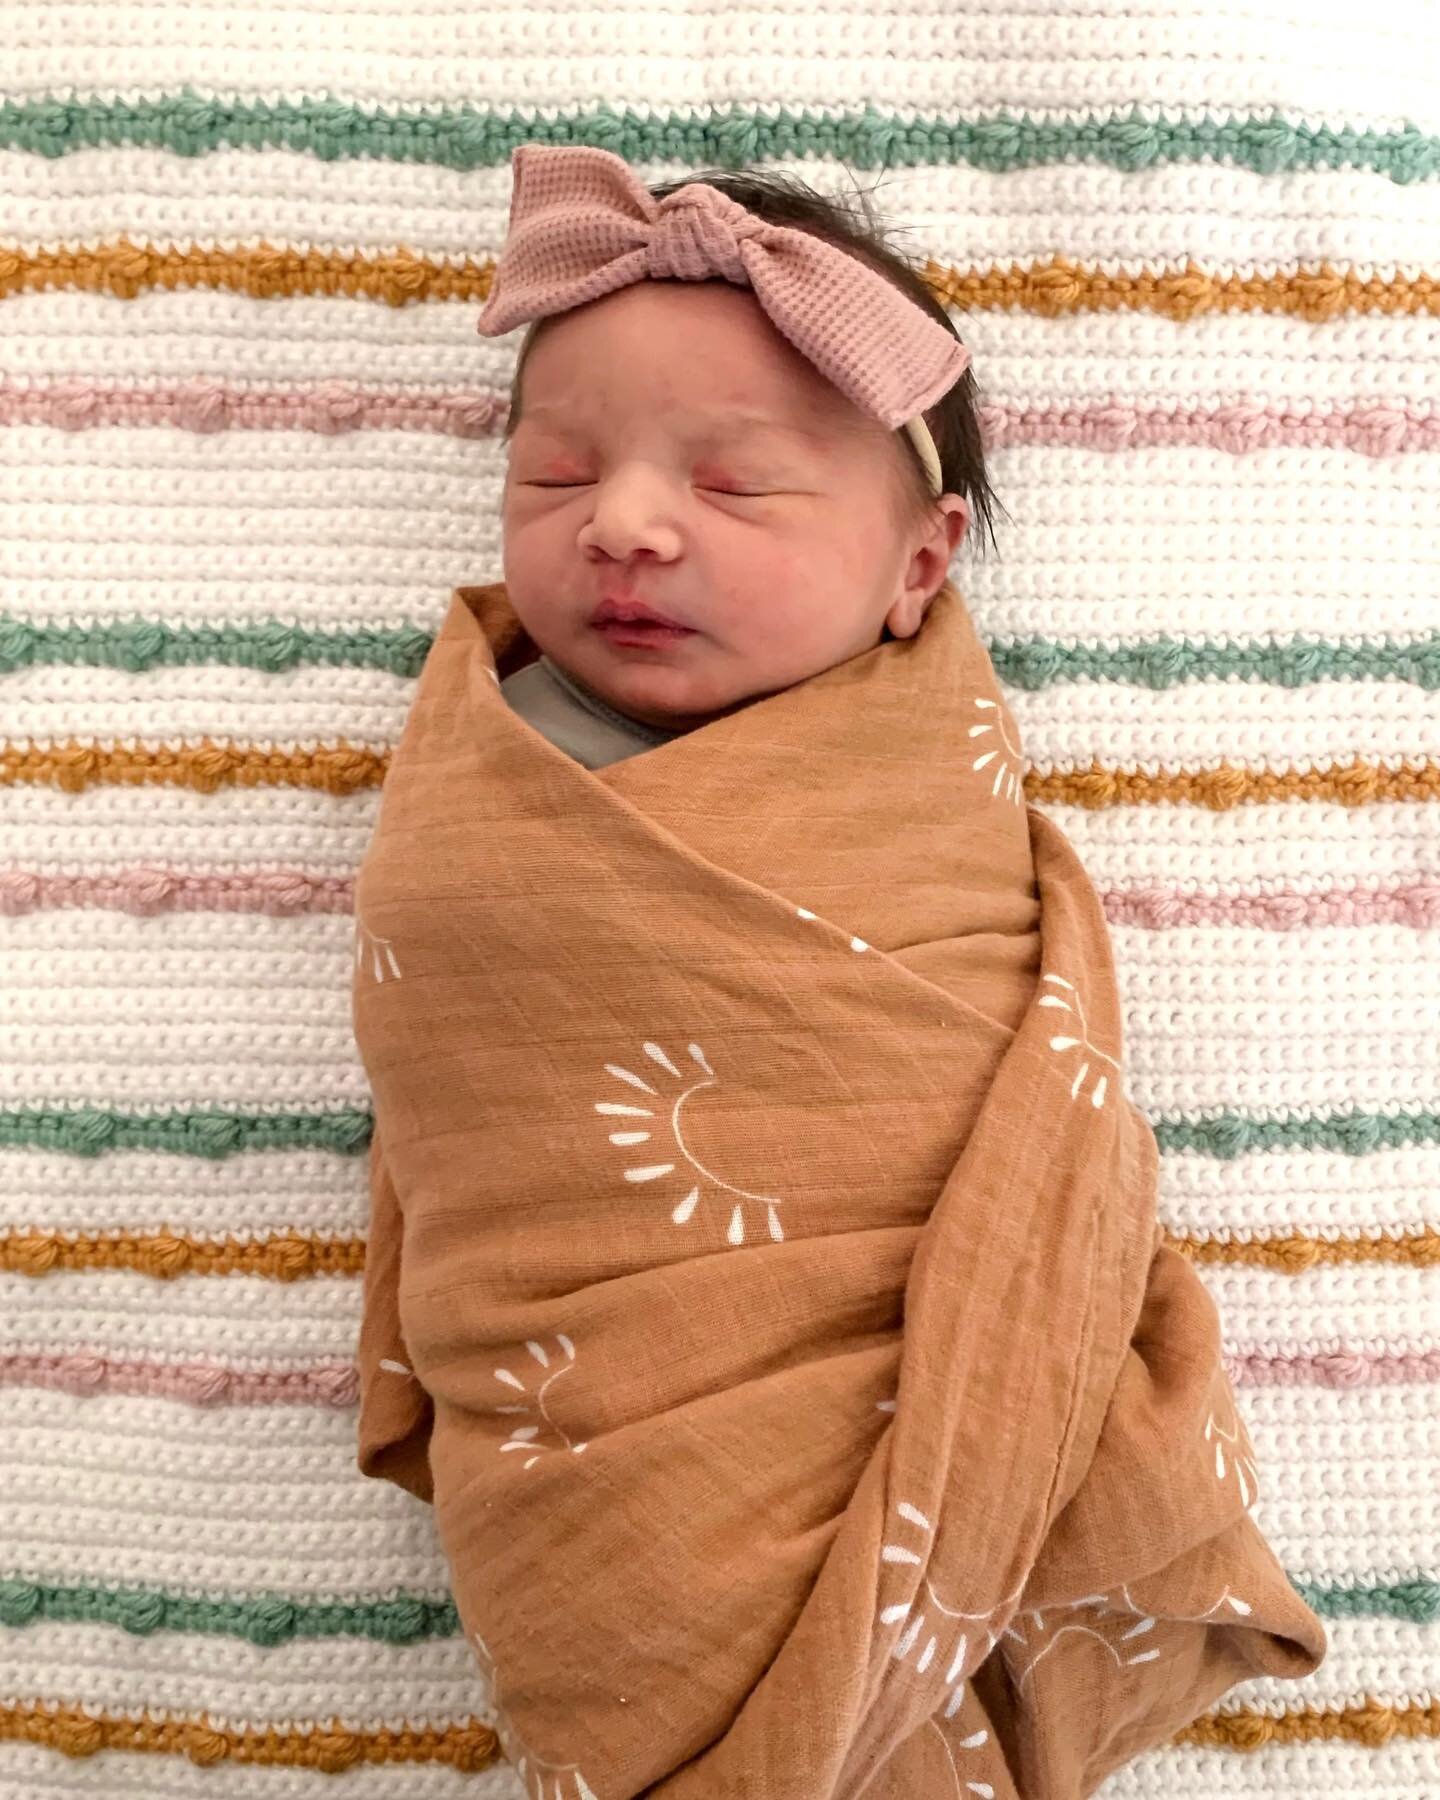 Our girl is here!
Ruth Elise Aguero
Born 3/4/2022 at 11:45pm
7lbs, 5oz; 20&rdquo; long

What a gift she is! We are so grateful to God for growing our family and knitting this new life together to be ours, but more truly His. We love her already.

#si